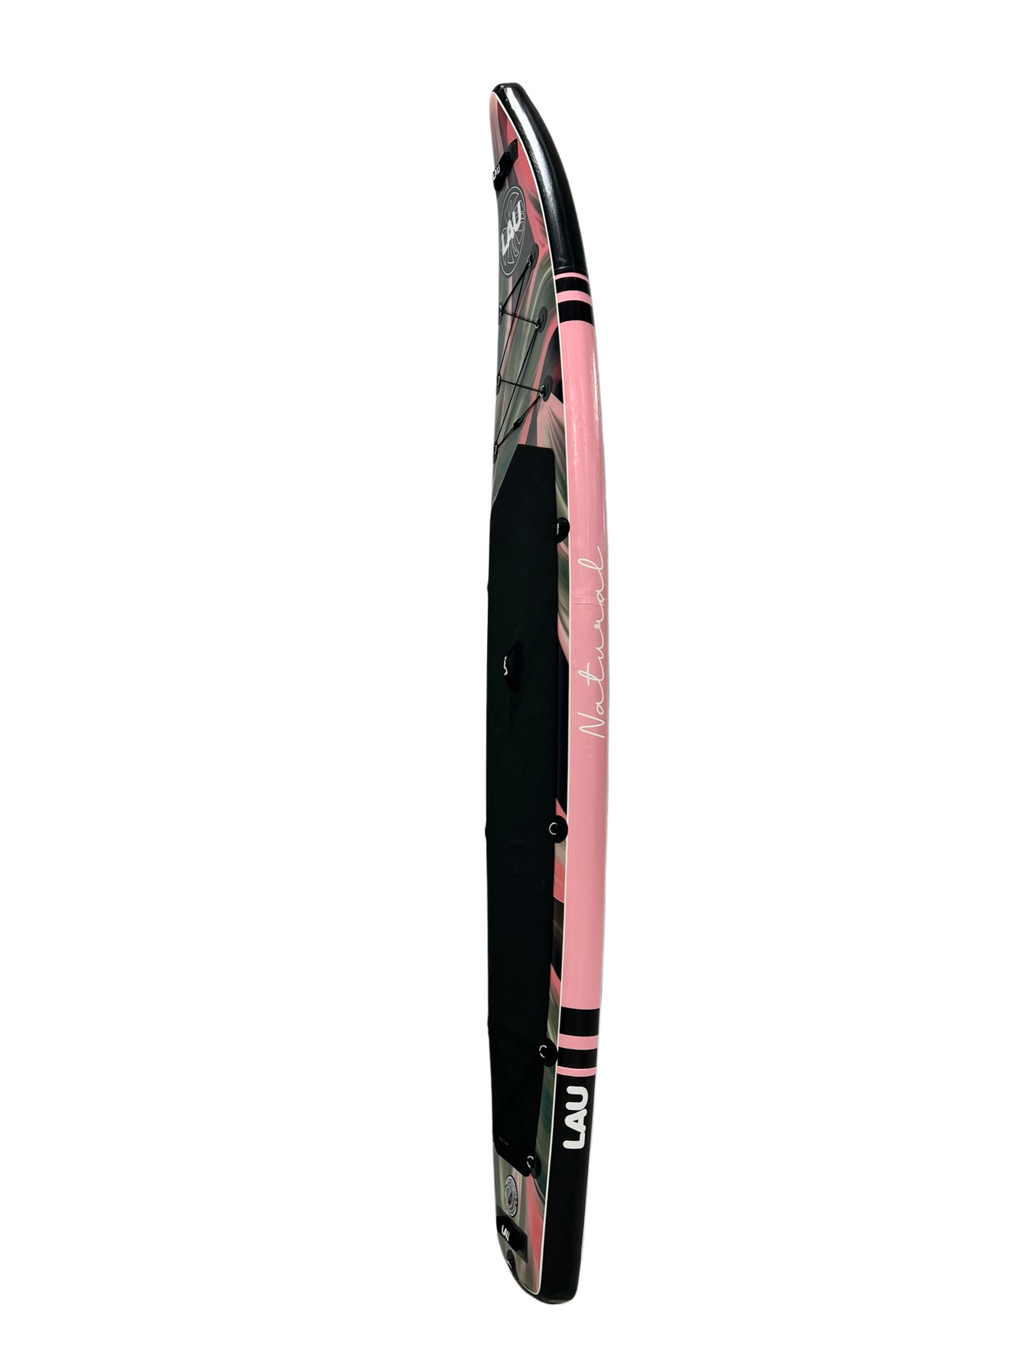 Natural- 12'6 Touring- Paddle board gonflable